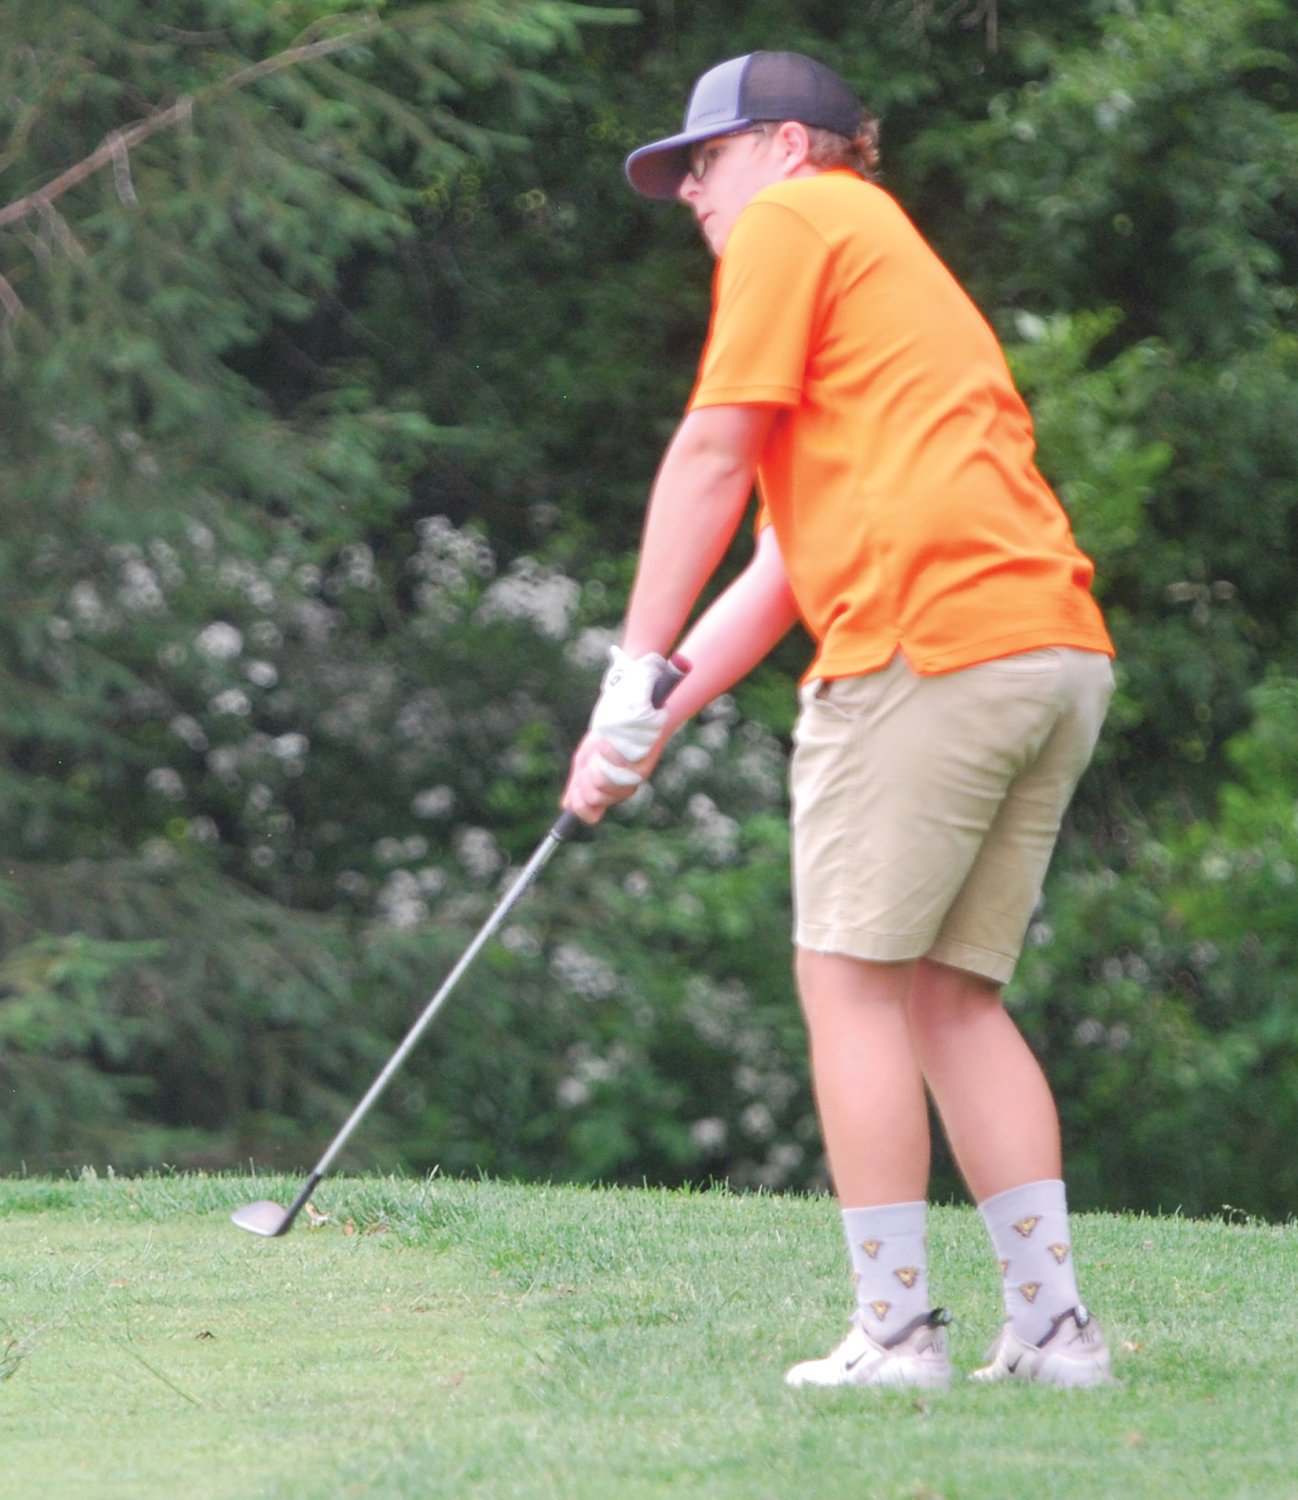 North Montgomery's Hayden Turner led the Chargers with a low score of 83.